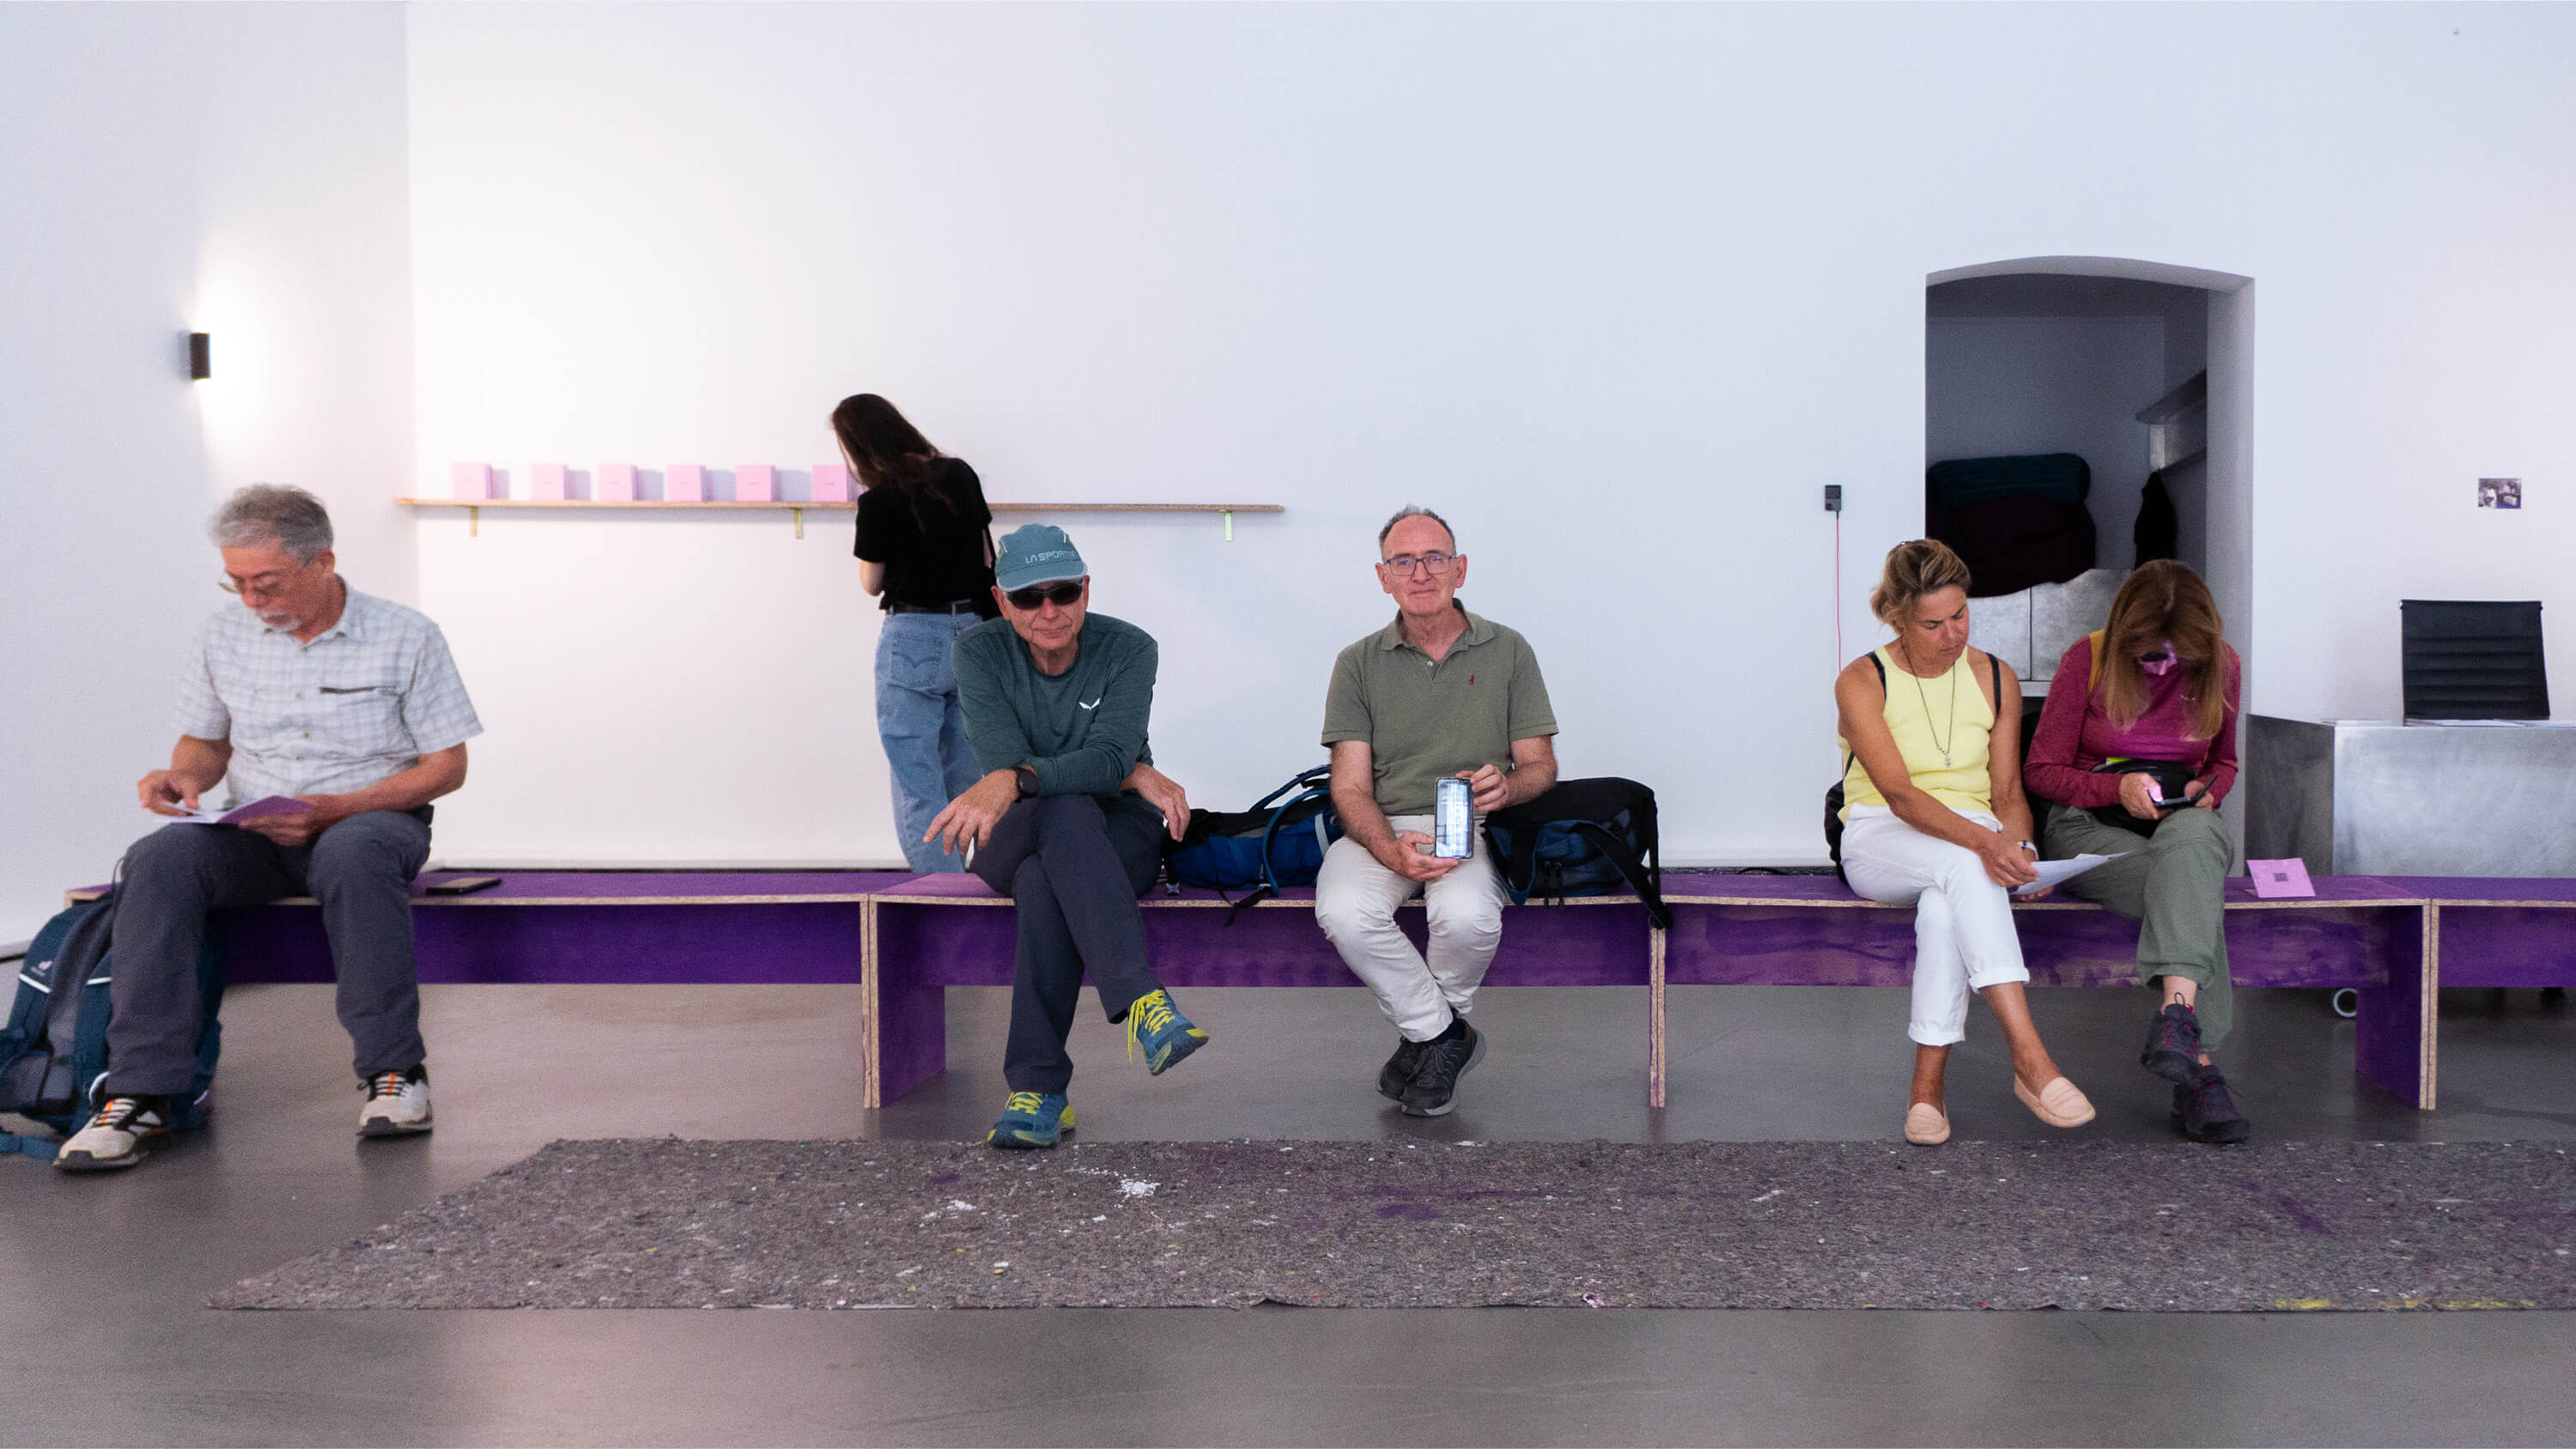 Contemporary art exhibition with speakers, purple benches and people hanging out.